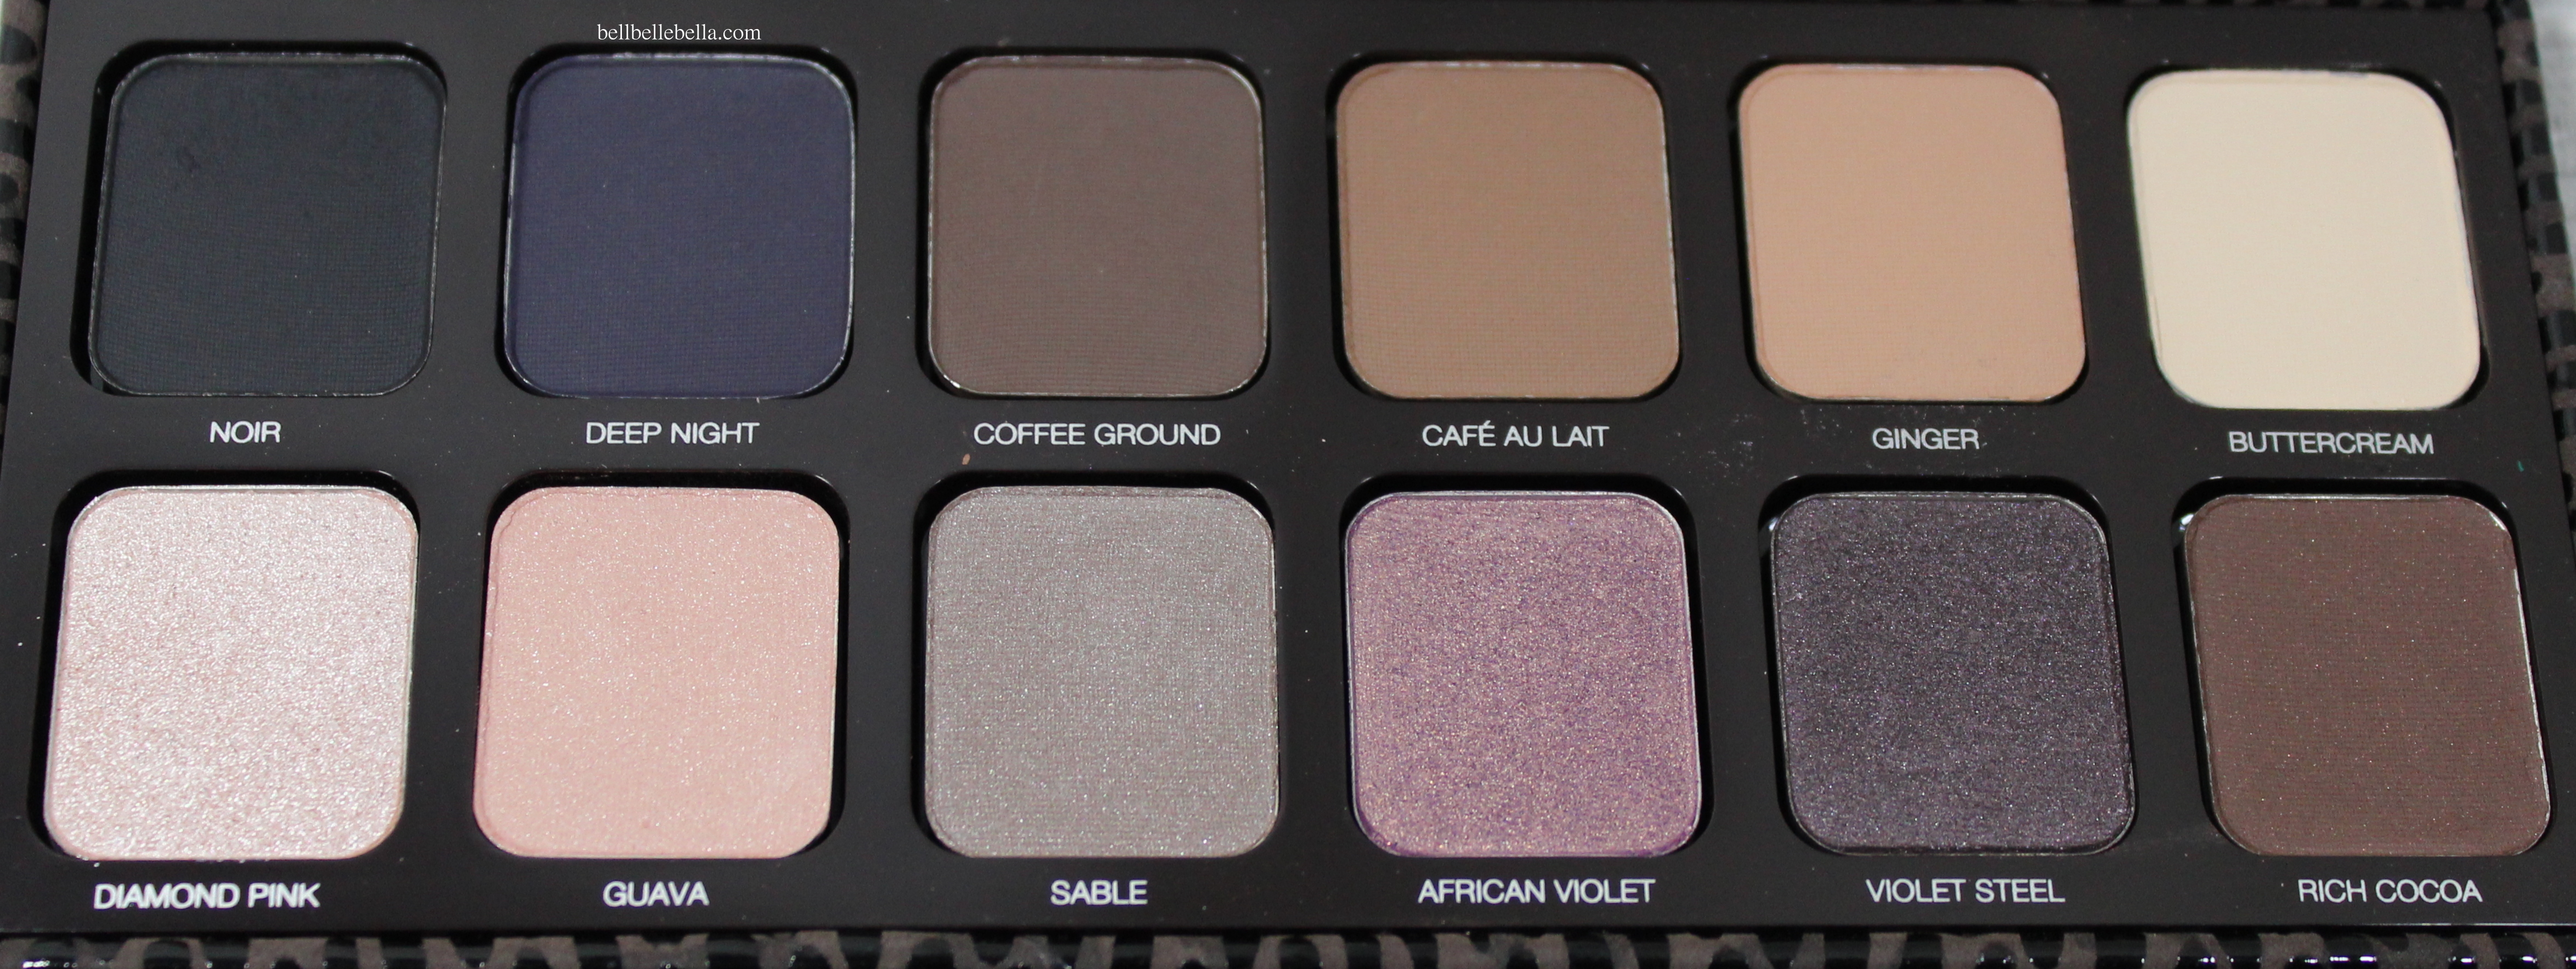 Laura Mercier Artist’s Palette for Eyes Collection Spring 2014 graphic